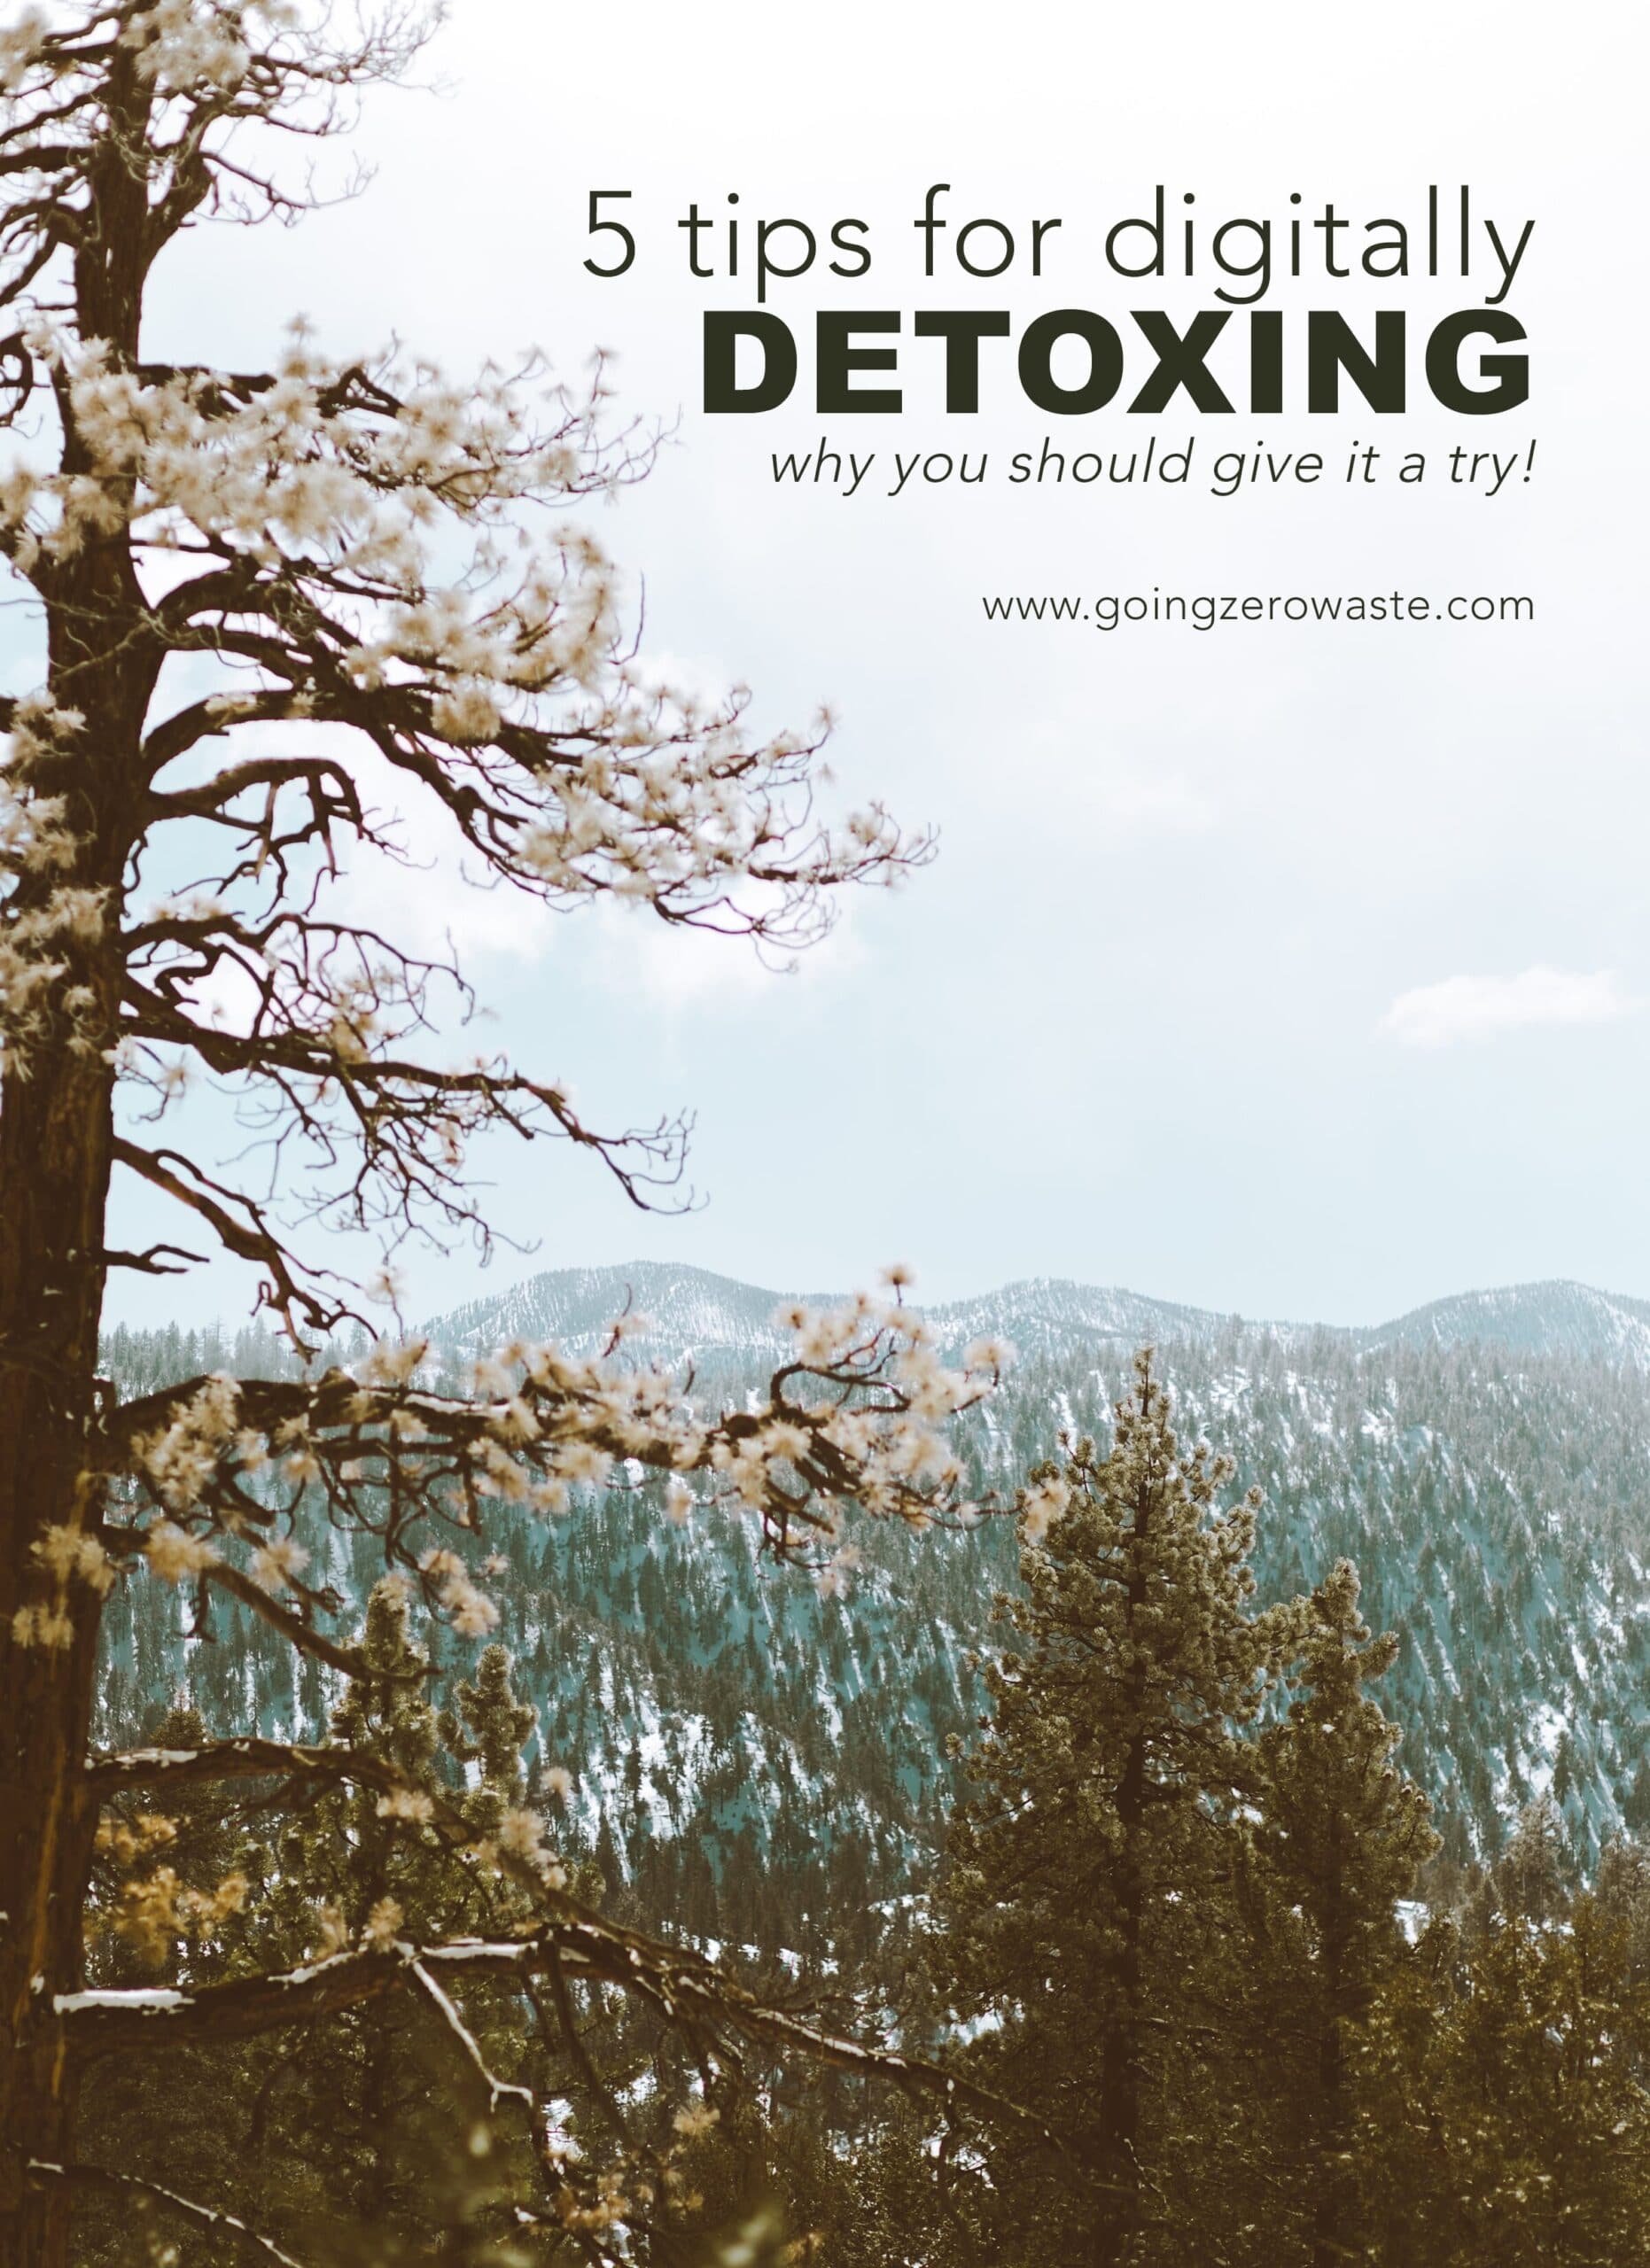 5 Tips for Digitally Detoxing and Why You Should Give it a Try